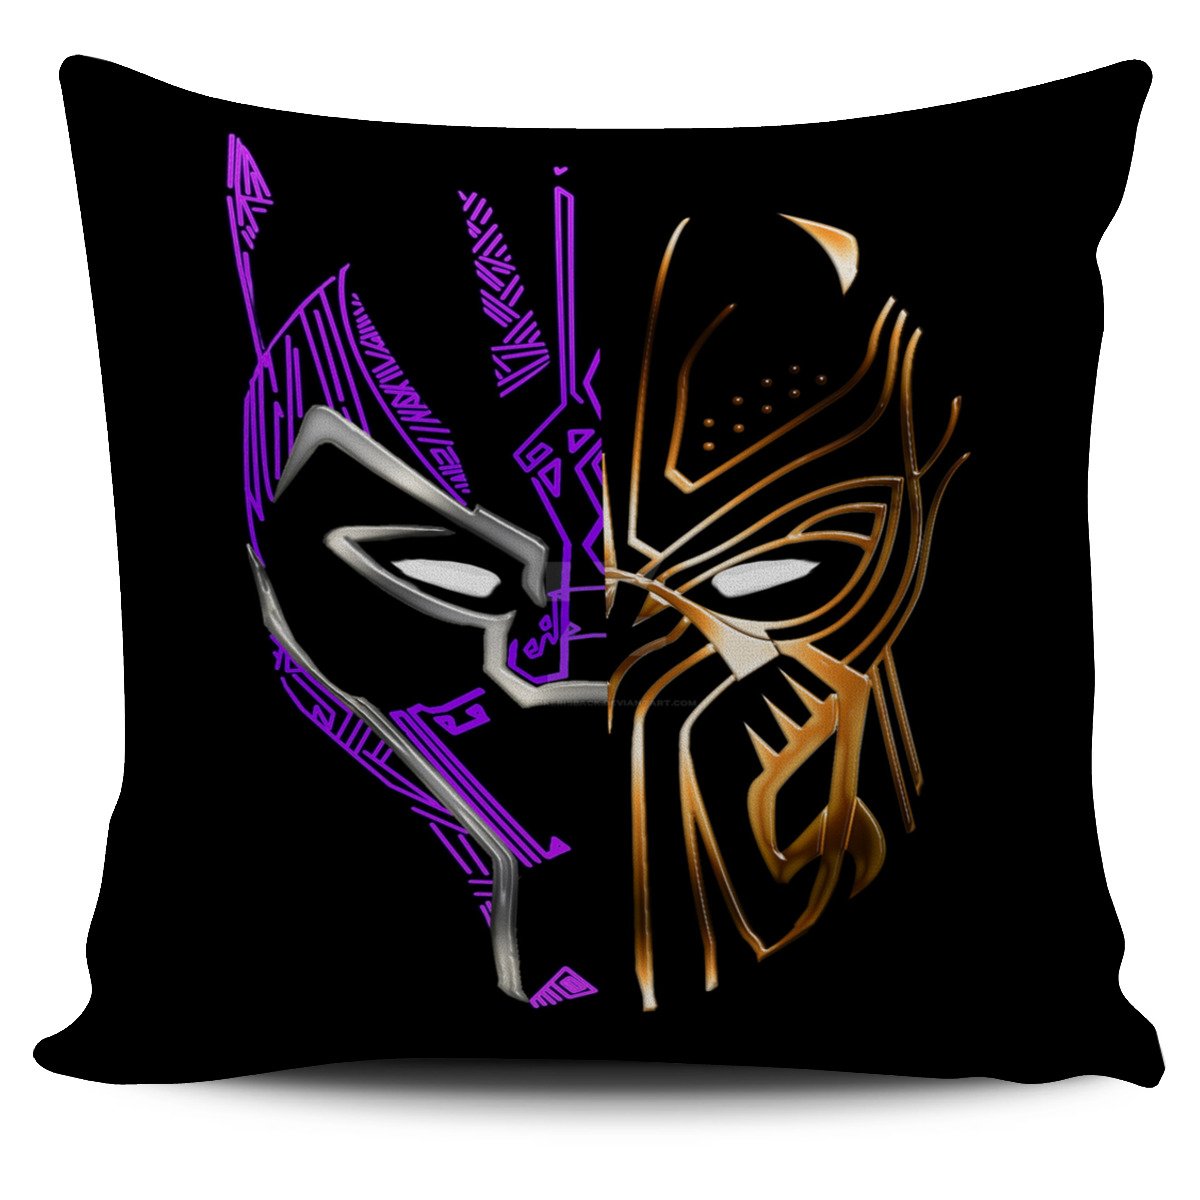 Black Panther Pillow Covers